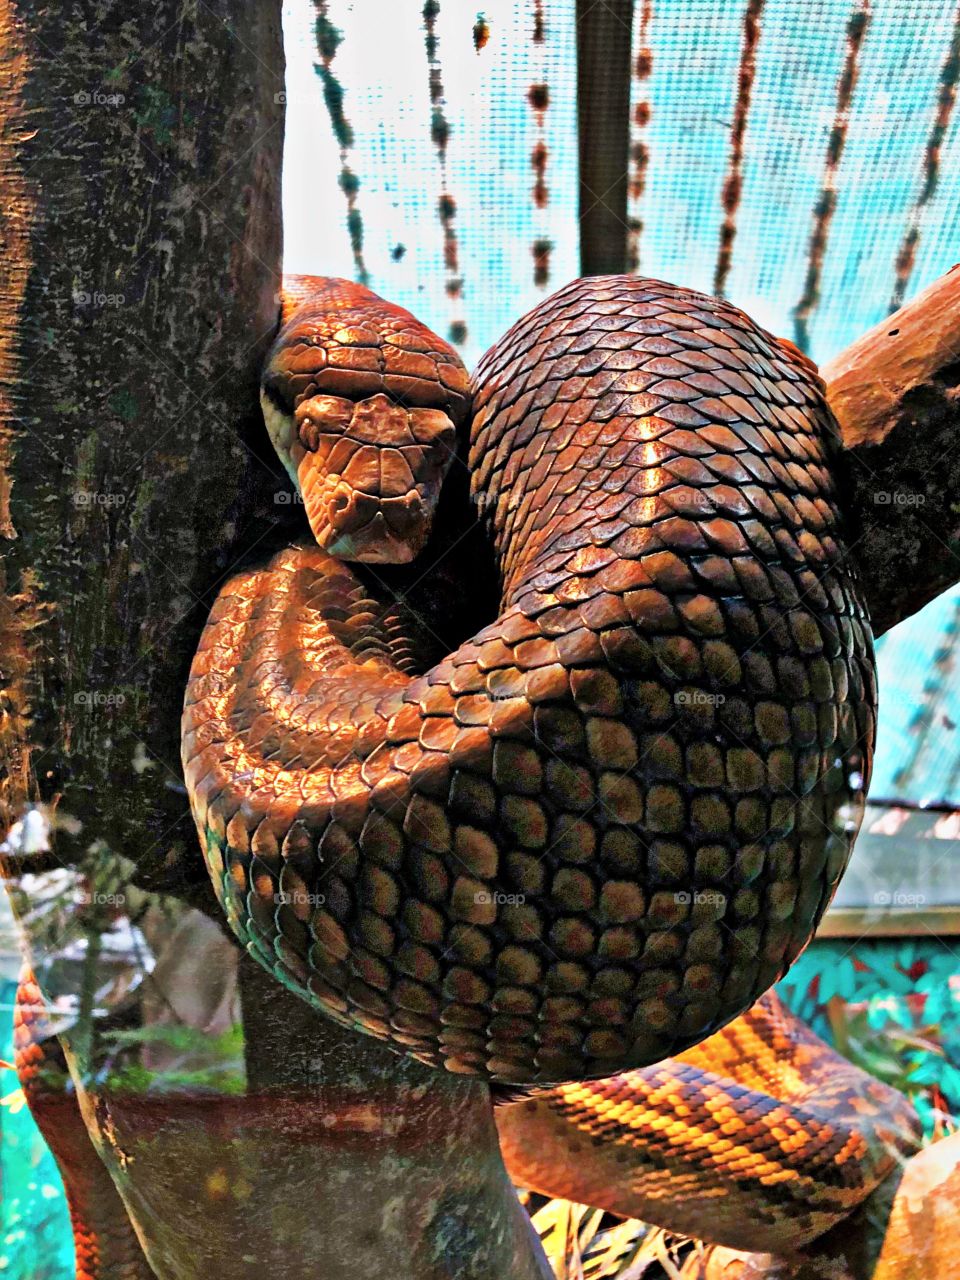 This fierce snake relaxes on a tree branch after a long day of slithering around the forest floor. 